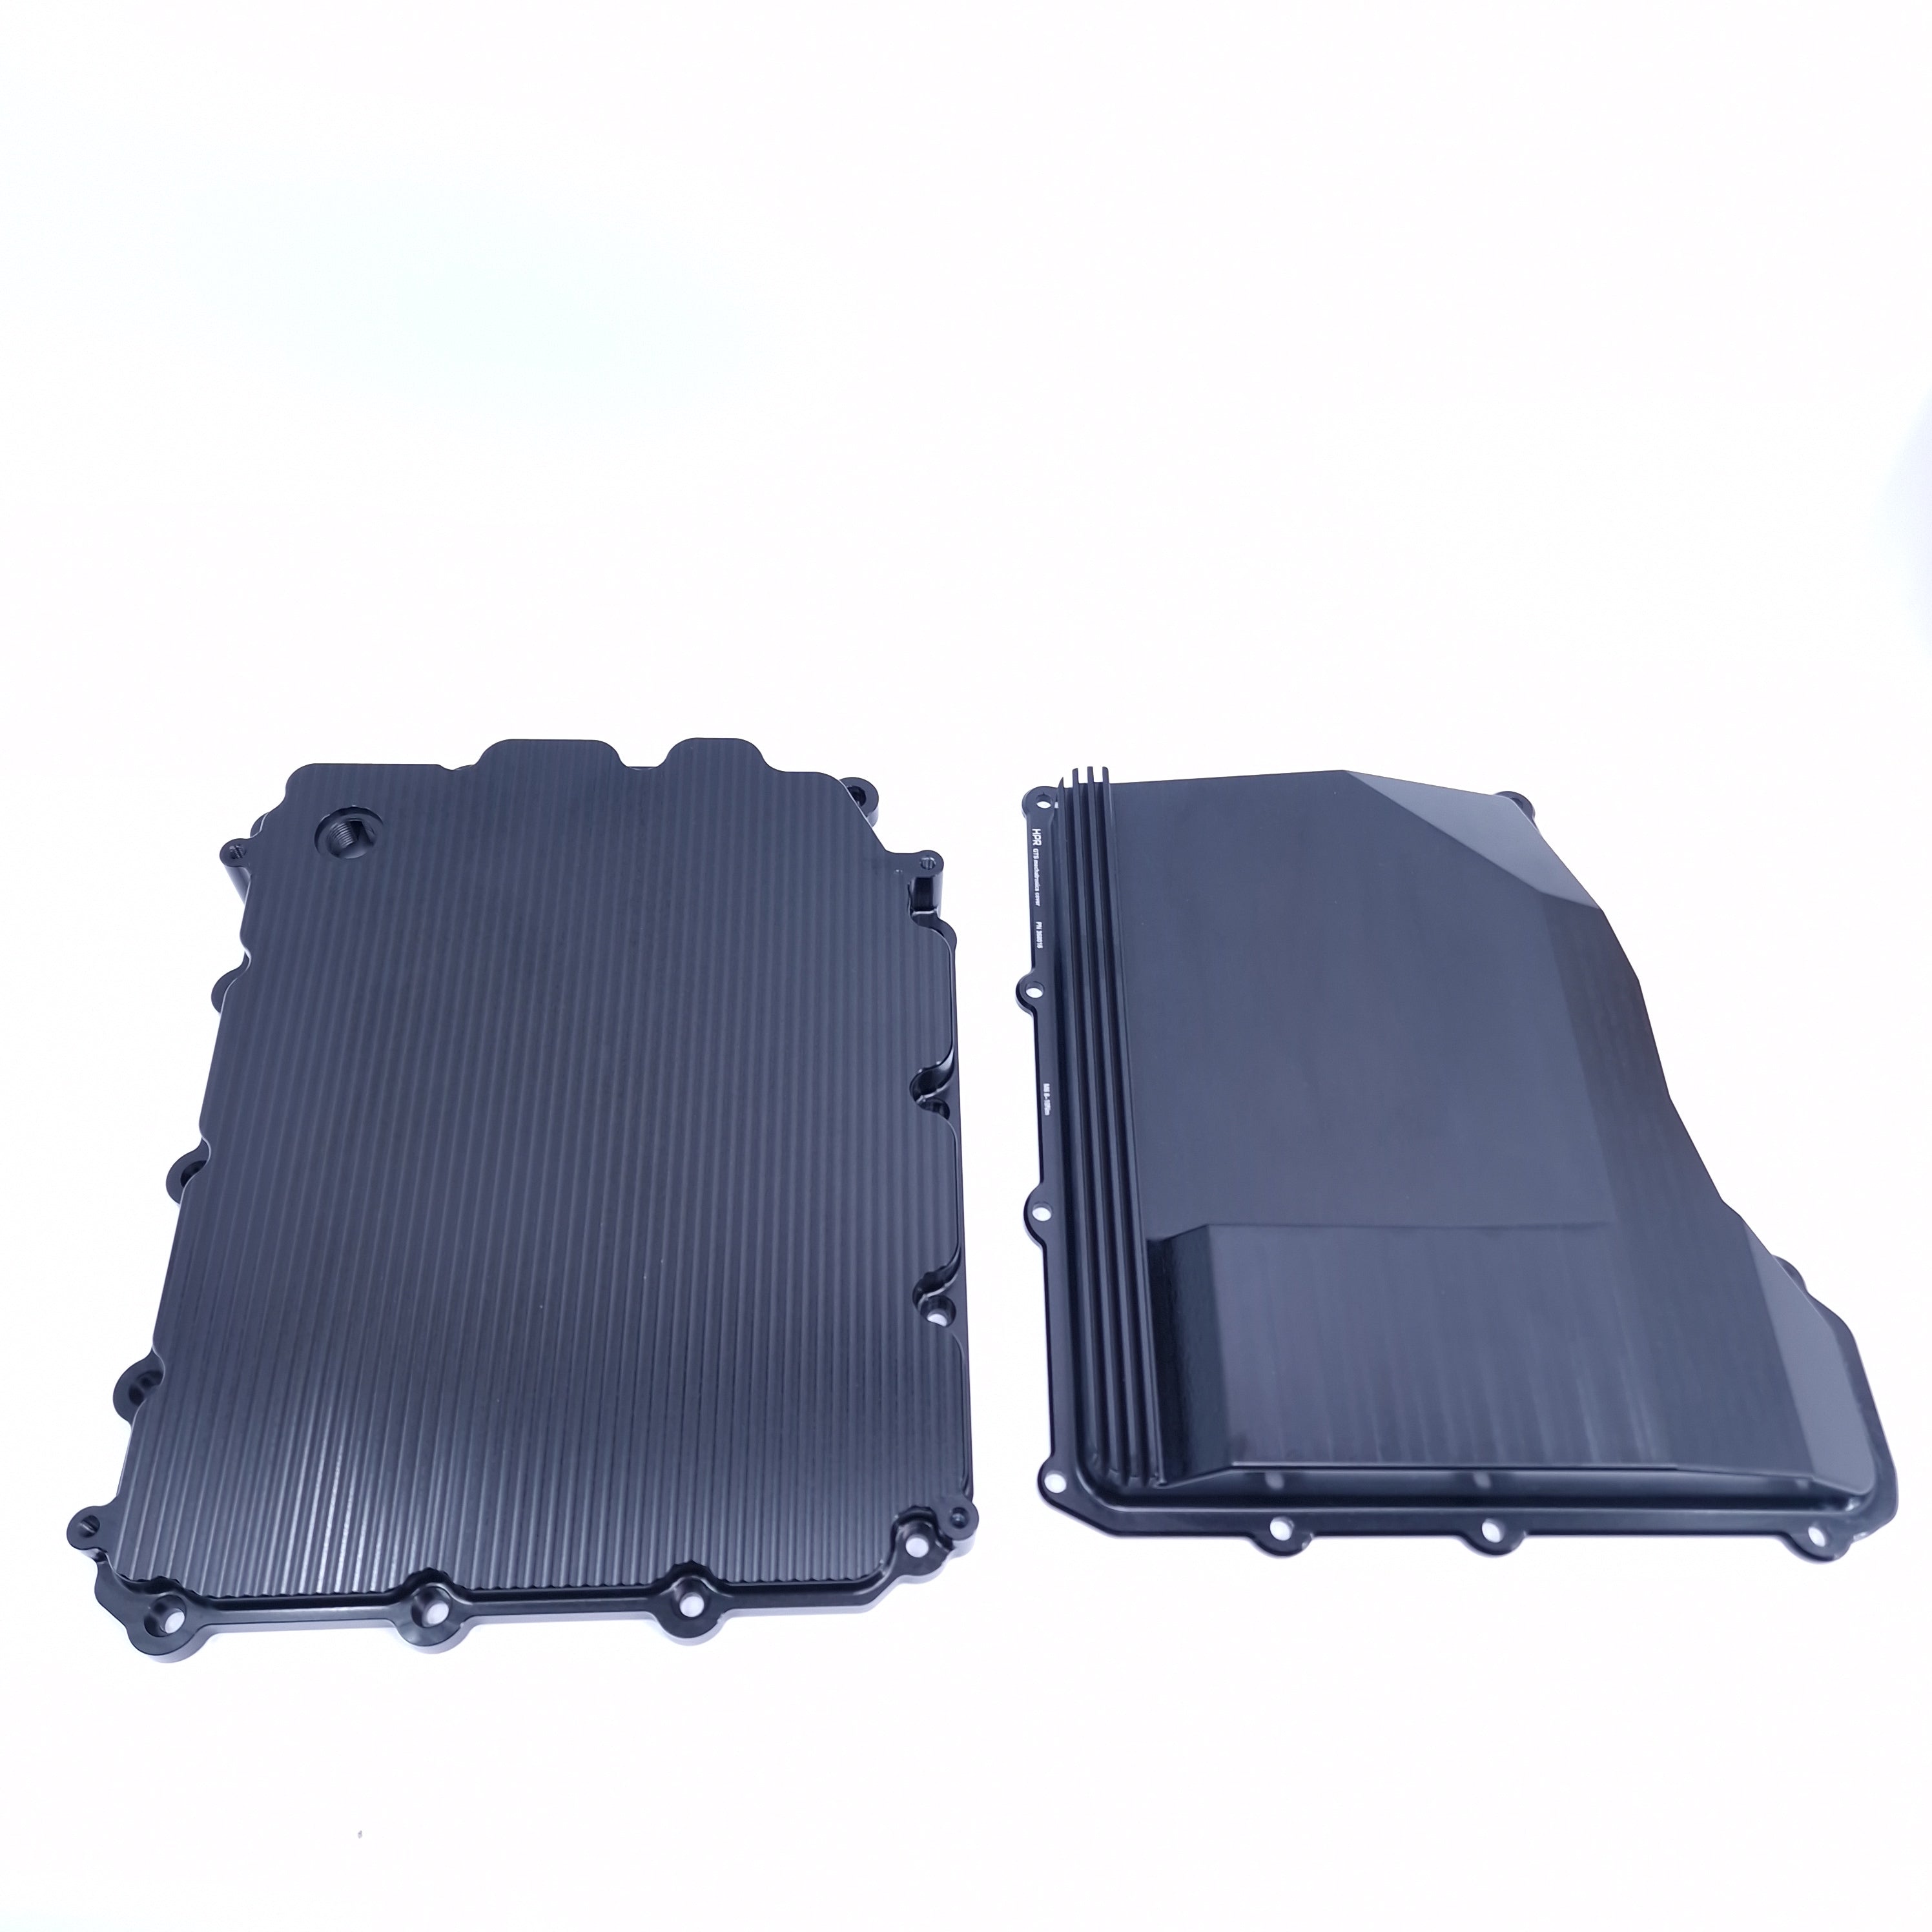 HPR DCT oil pan and mechatronics cover kit